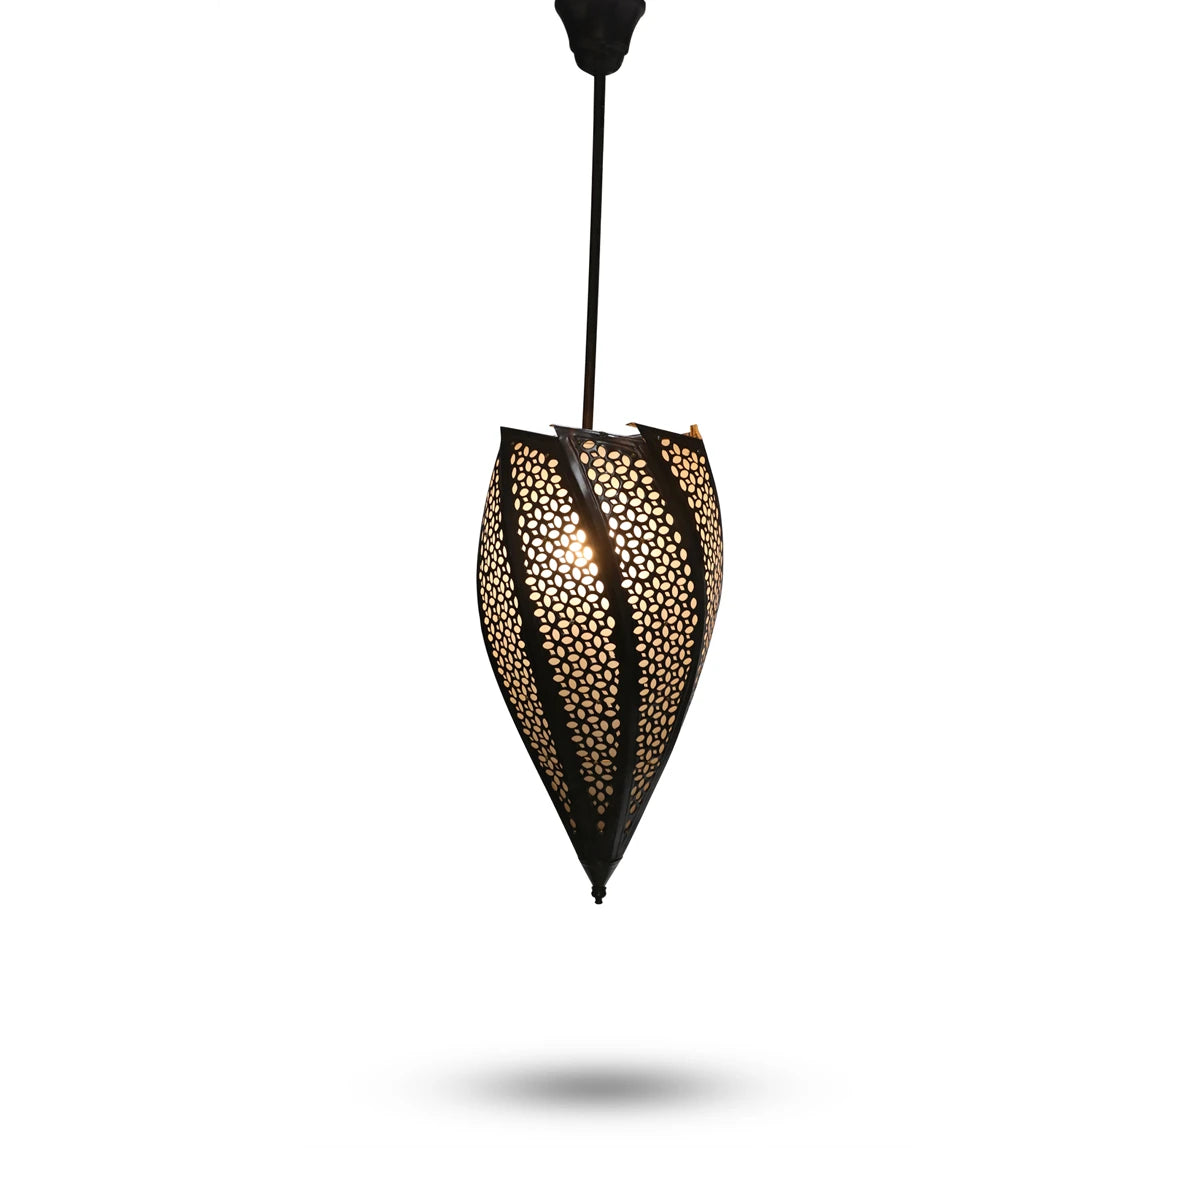 Front View of Swirled Syrian Ceiling Lantern with Lights On